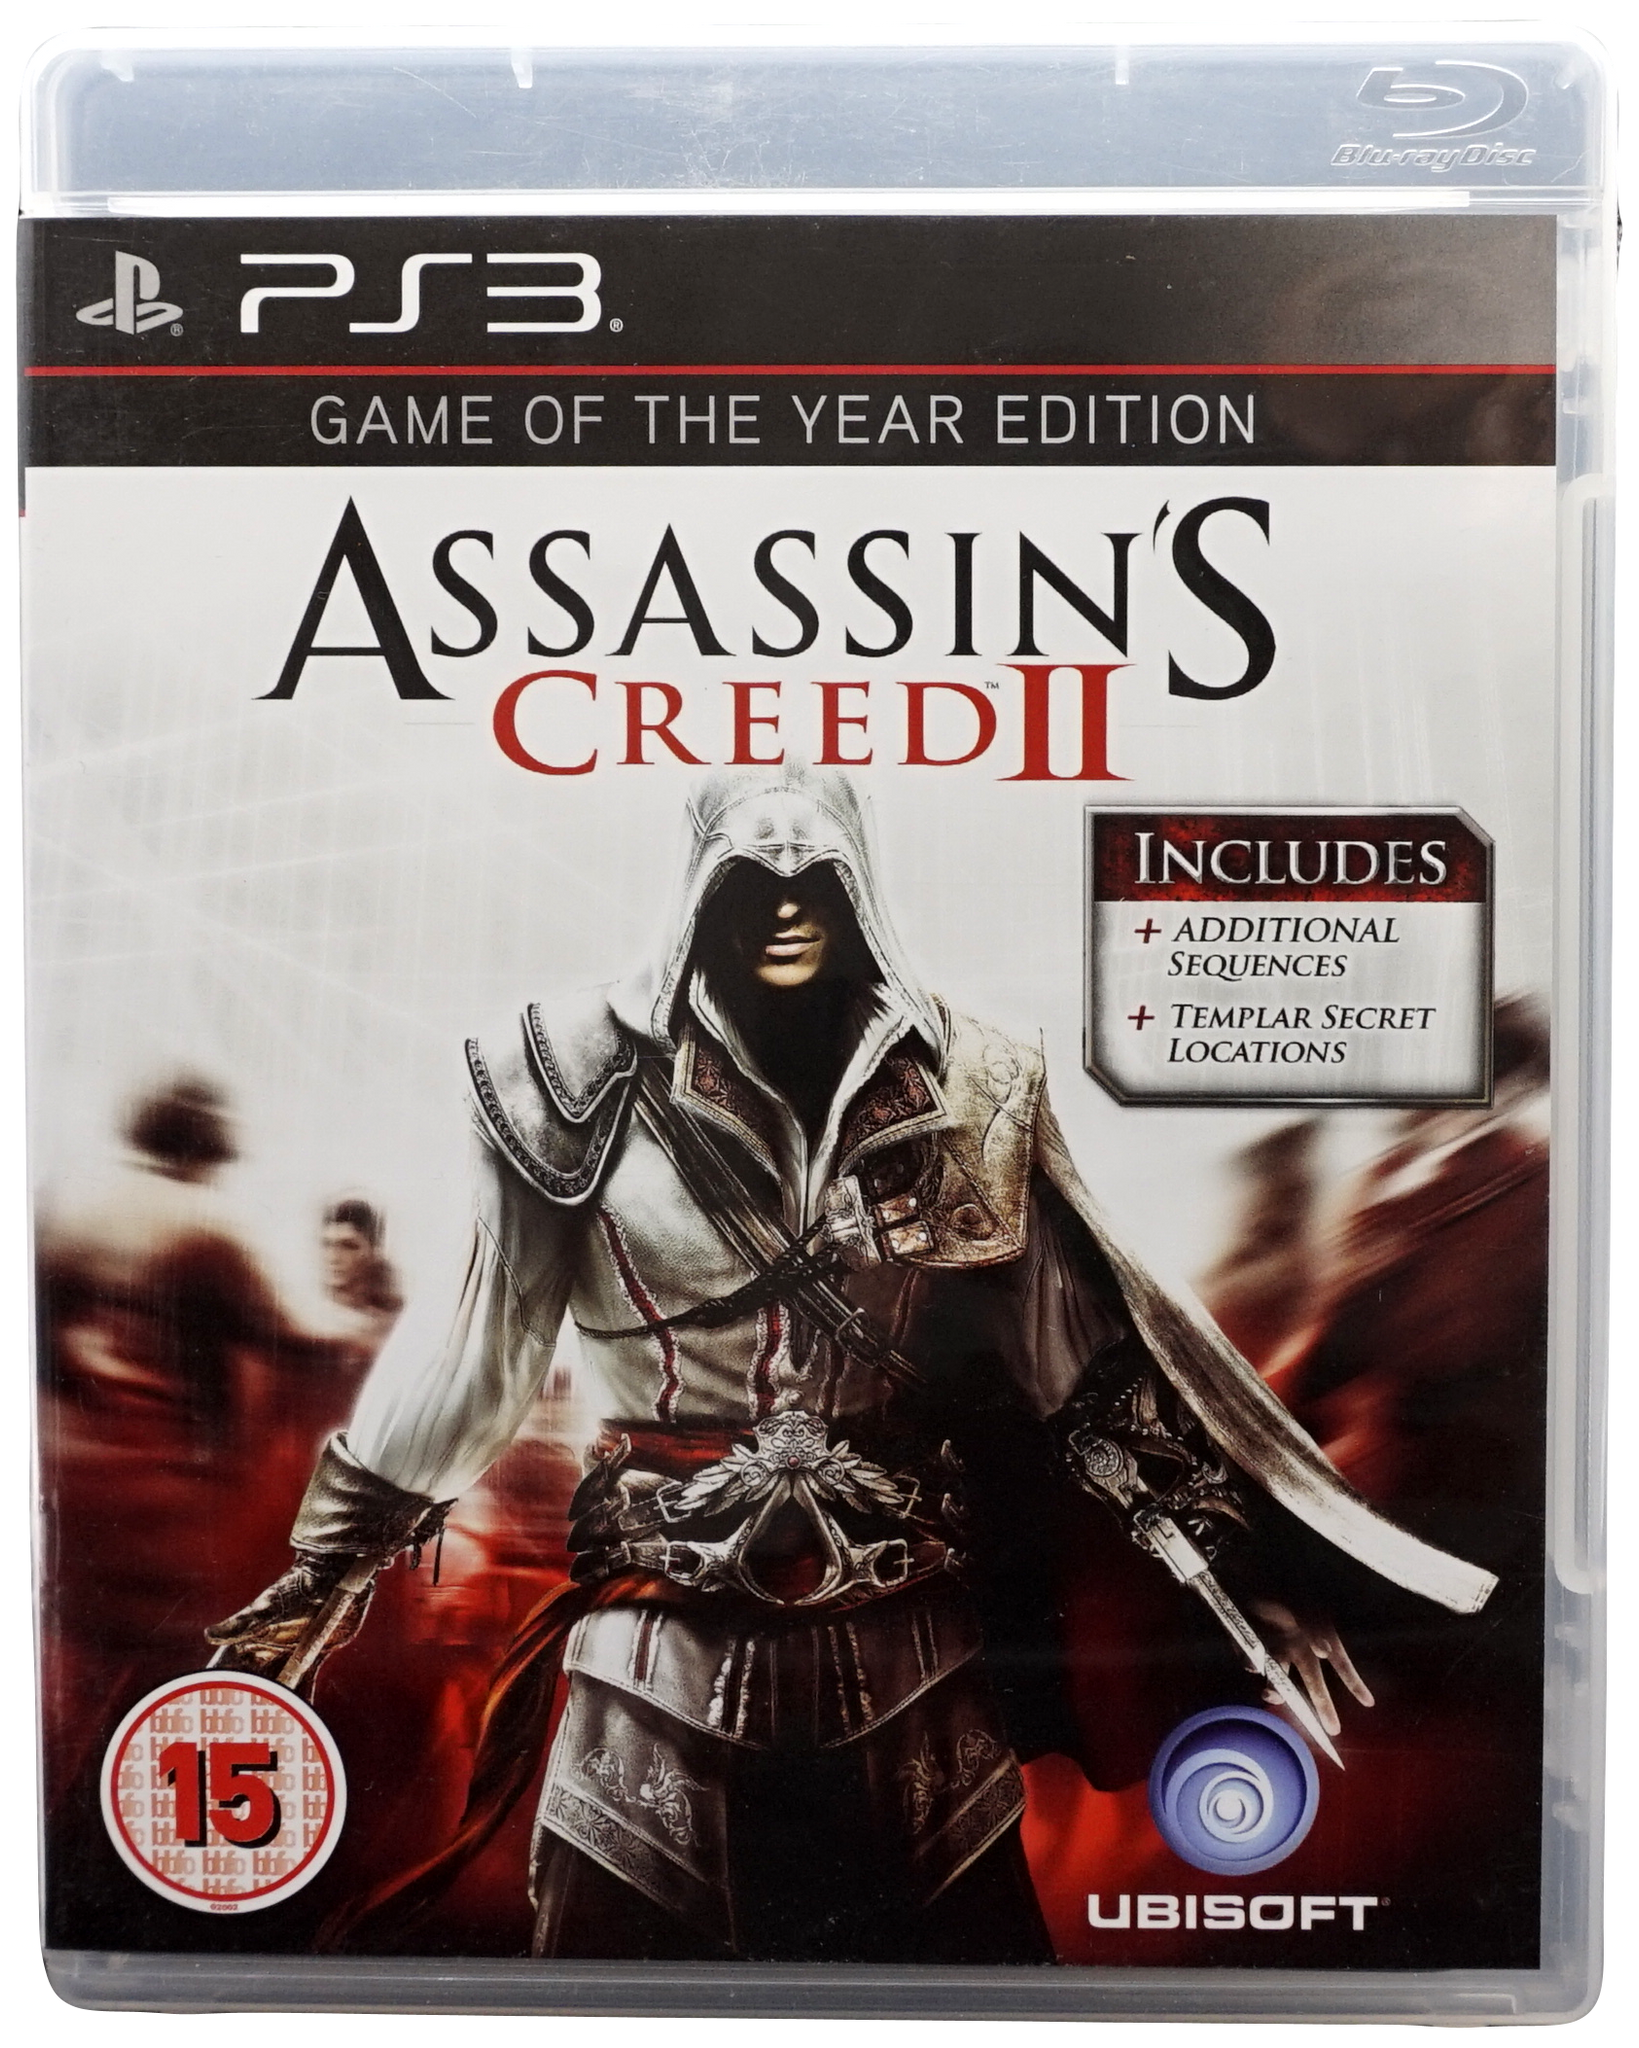 Assassin's Creed II : Game of the Year Edition (PS3)